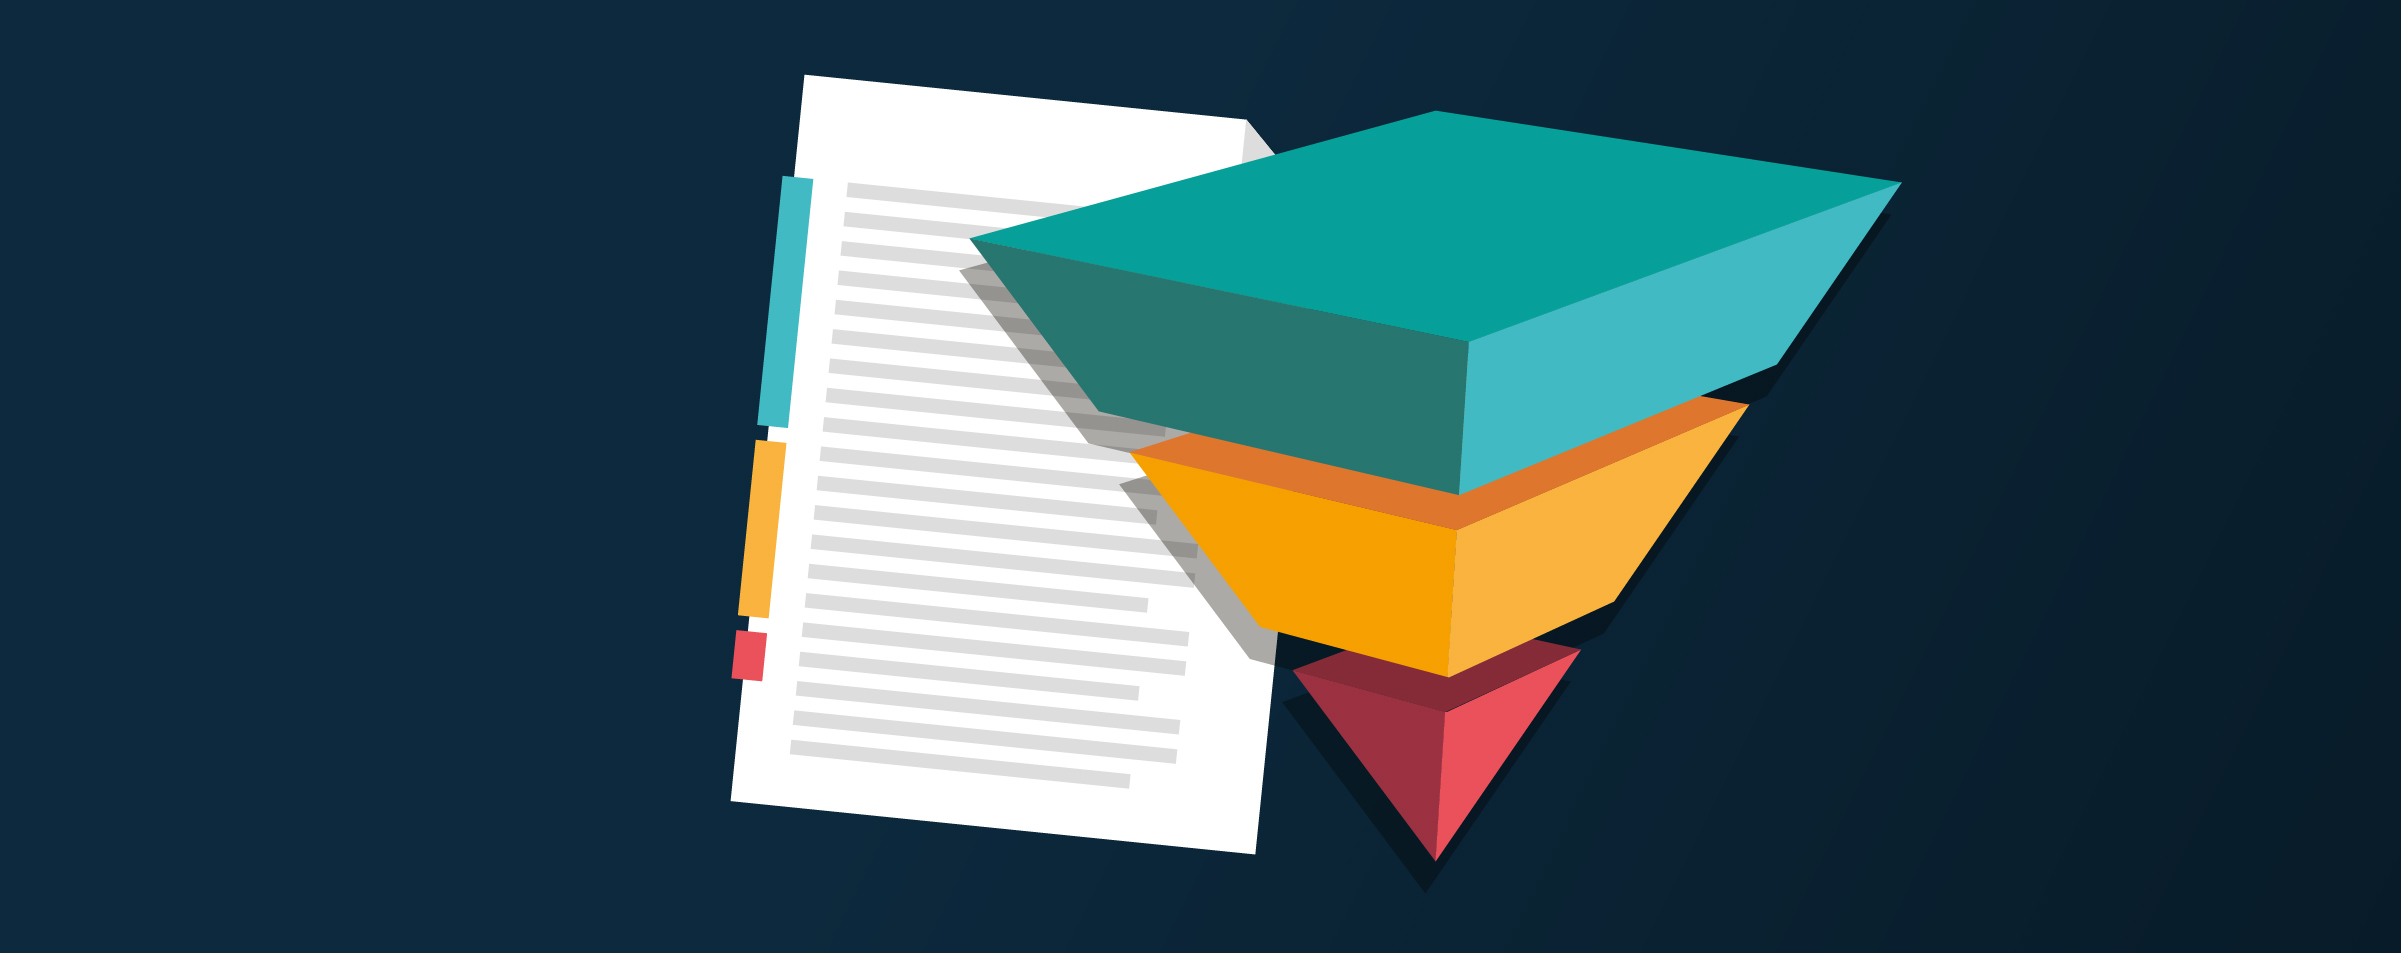 What You Need To Know About Inverted Pyramid Style For Press Release?